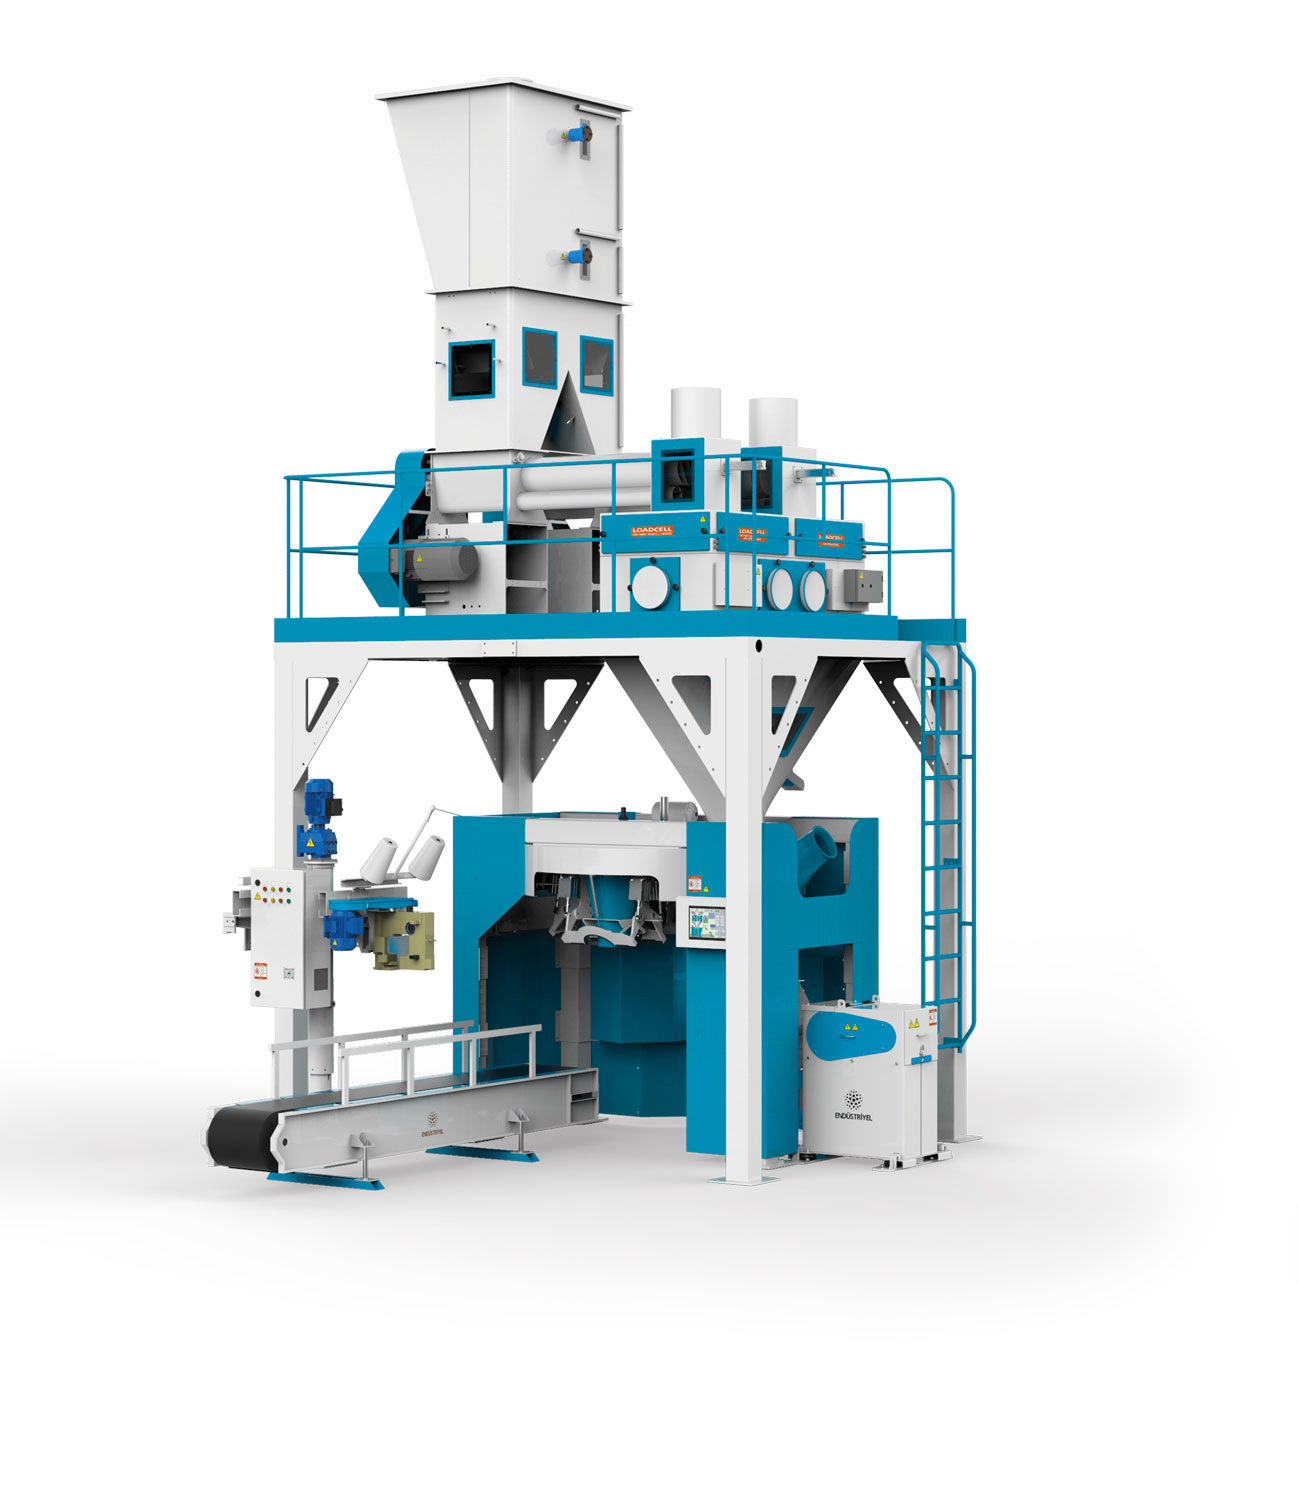 Flour Bagging Machine System With Single Weigh Hopper & Single Station 5/10 Kg4